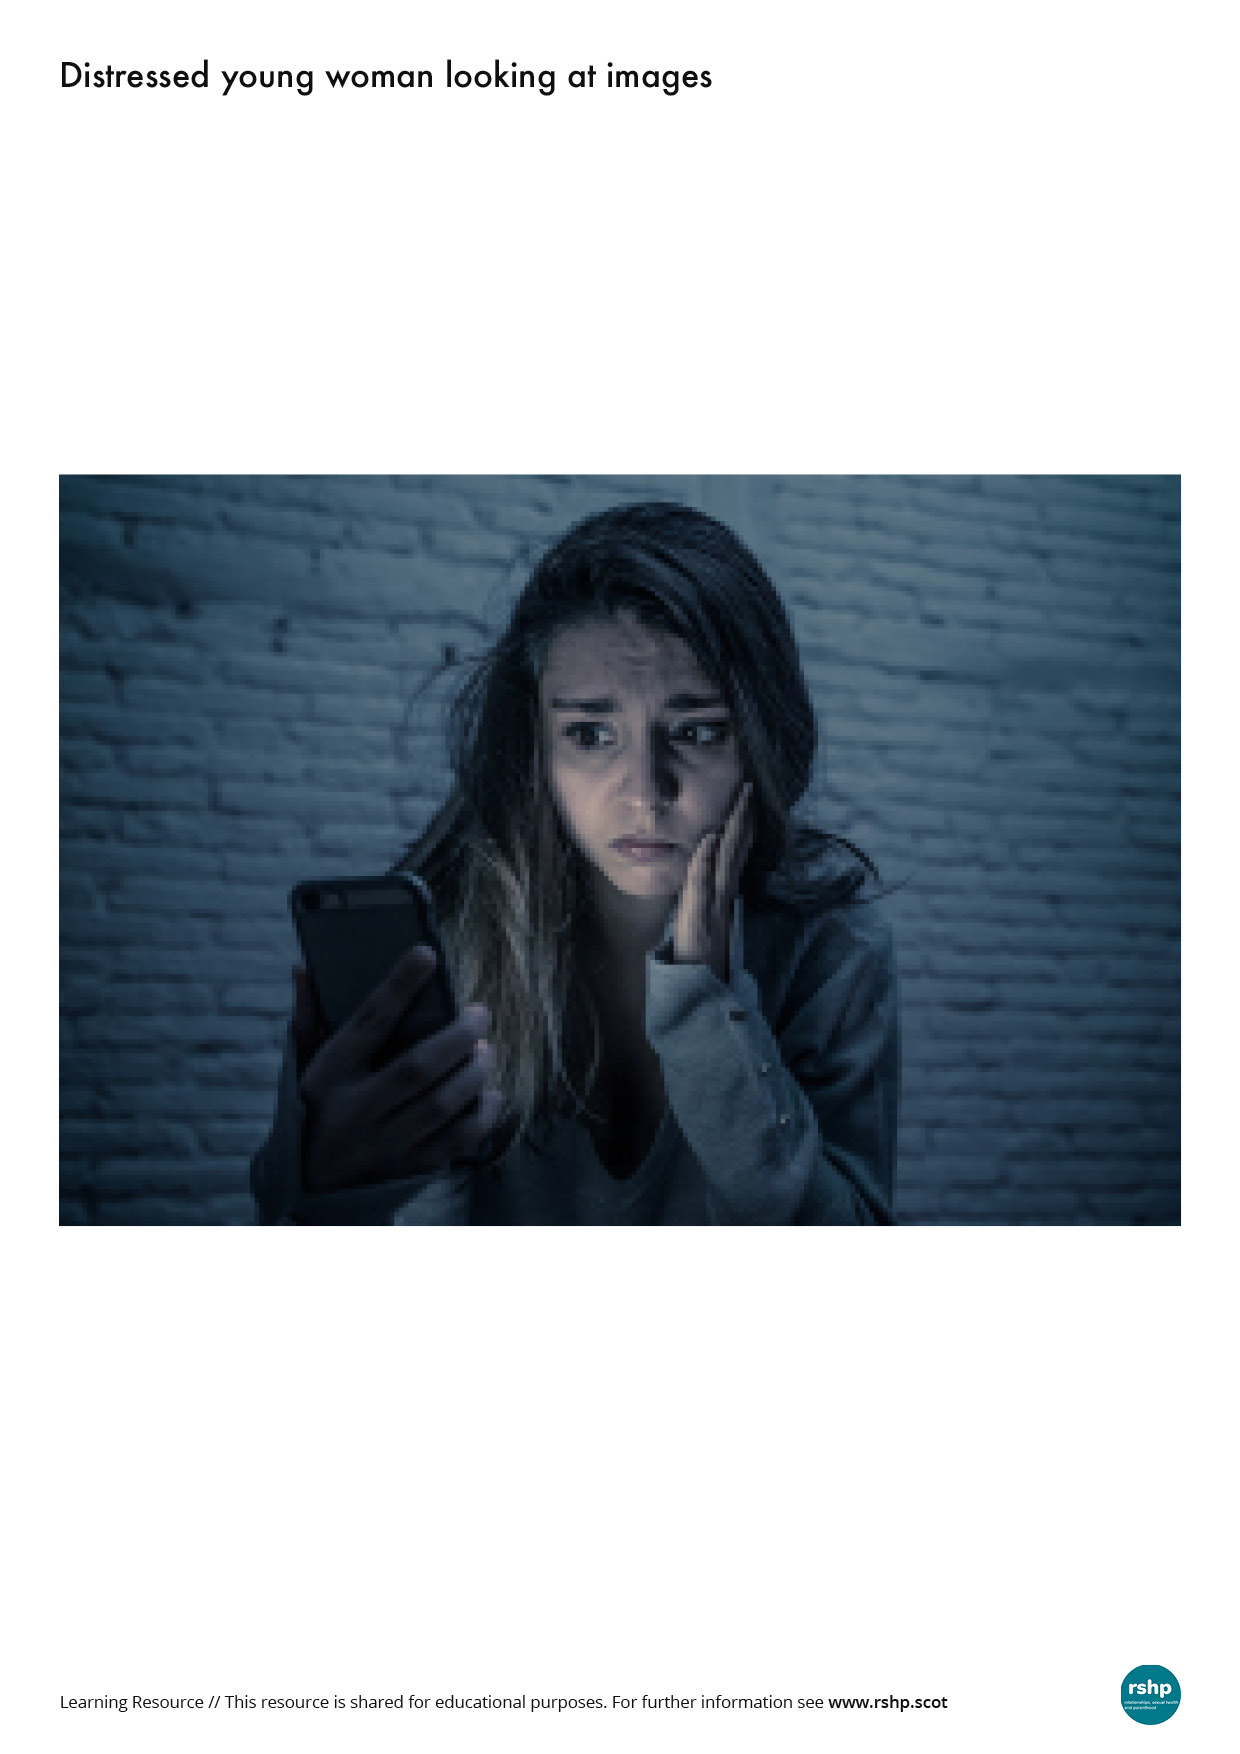 RSHP-ASN-Images-Young-girl-looking-distressed-at-images